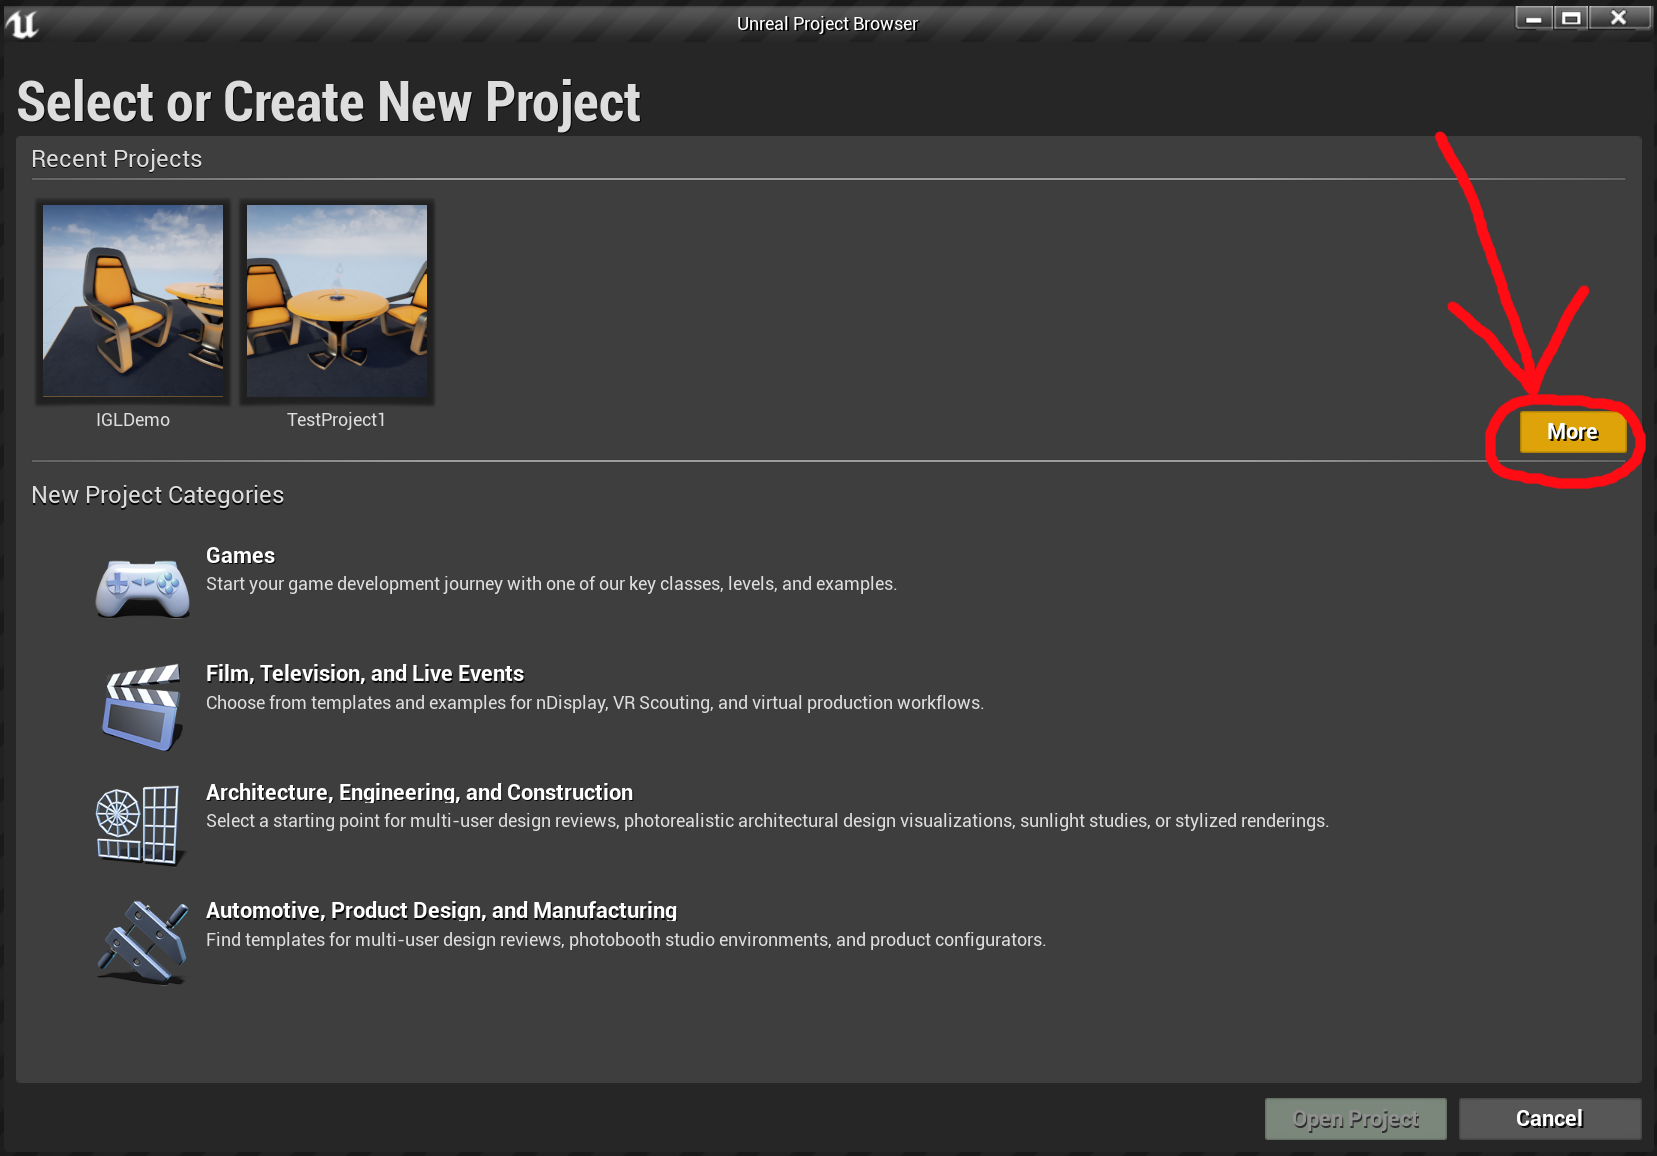  Click the  More  button to get to a different dialog where you can open an existing project 